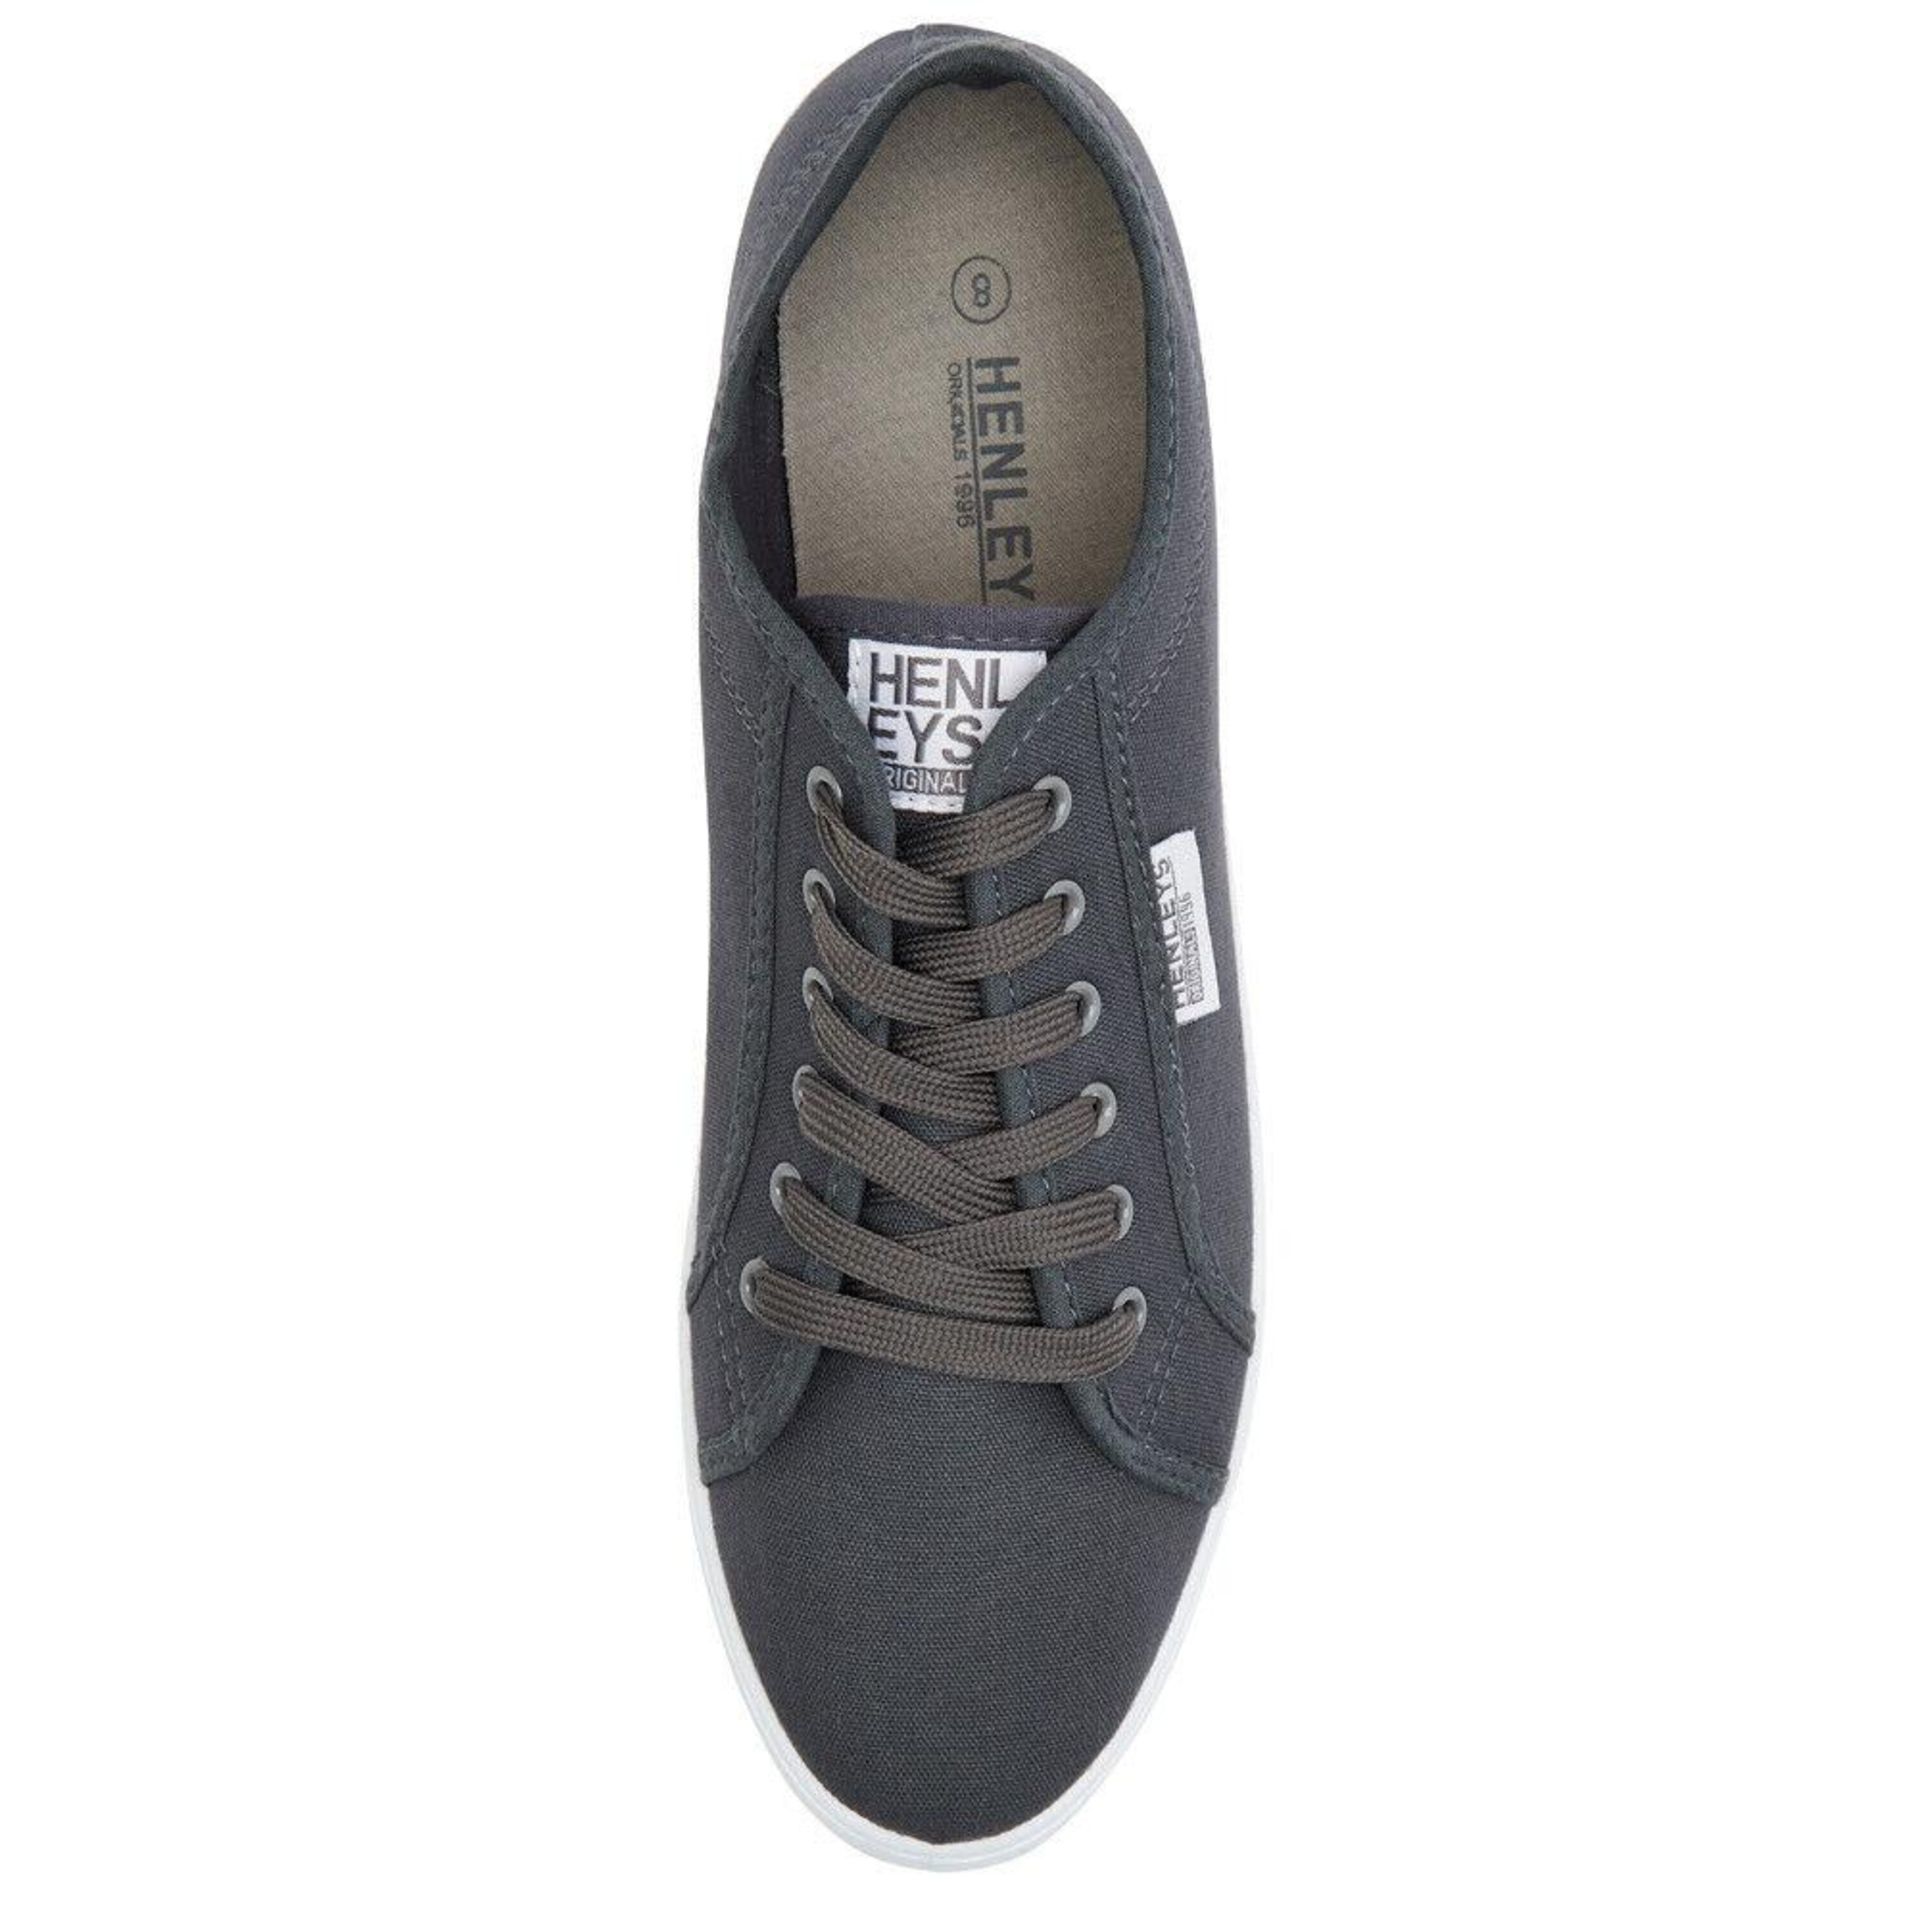 10 X BRAND NEW HENLEYS ORIGINAL CANVAS TRAINERS IN CHARCOAL GREY - ALL IN SIZE UK 10 - RRP £ 24.99 - - Image 2 of 4